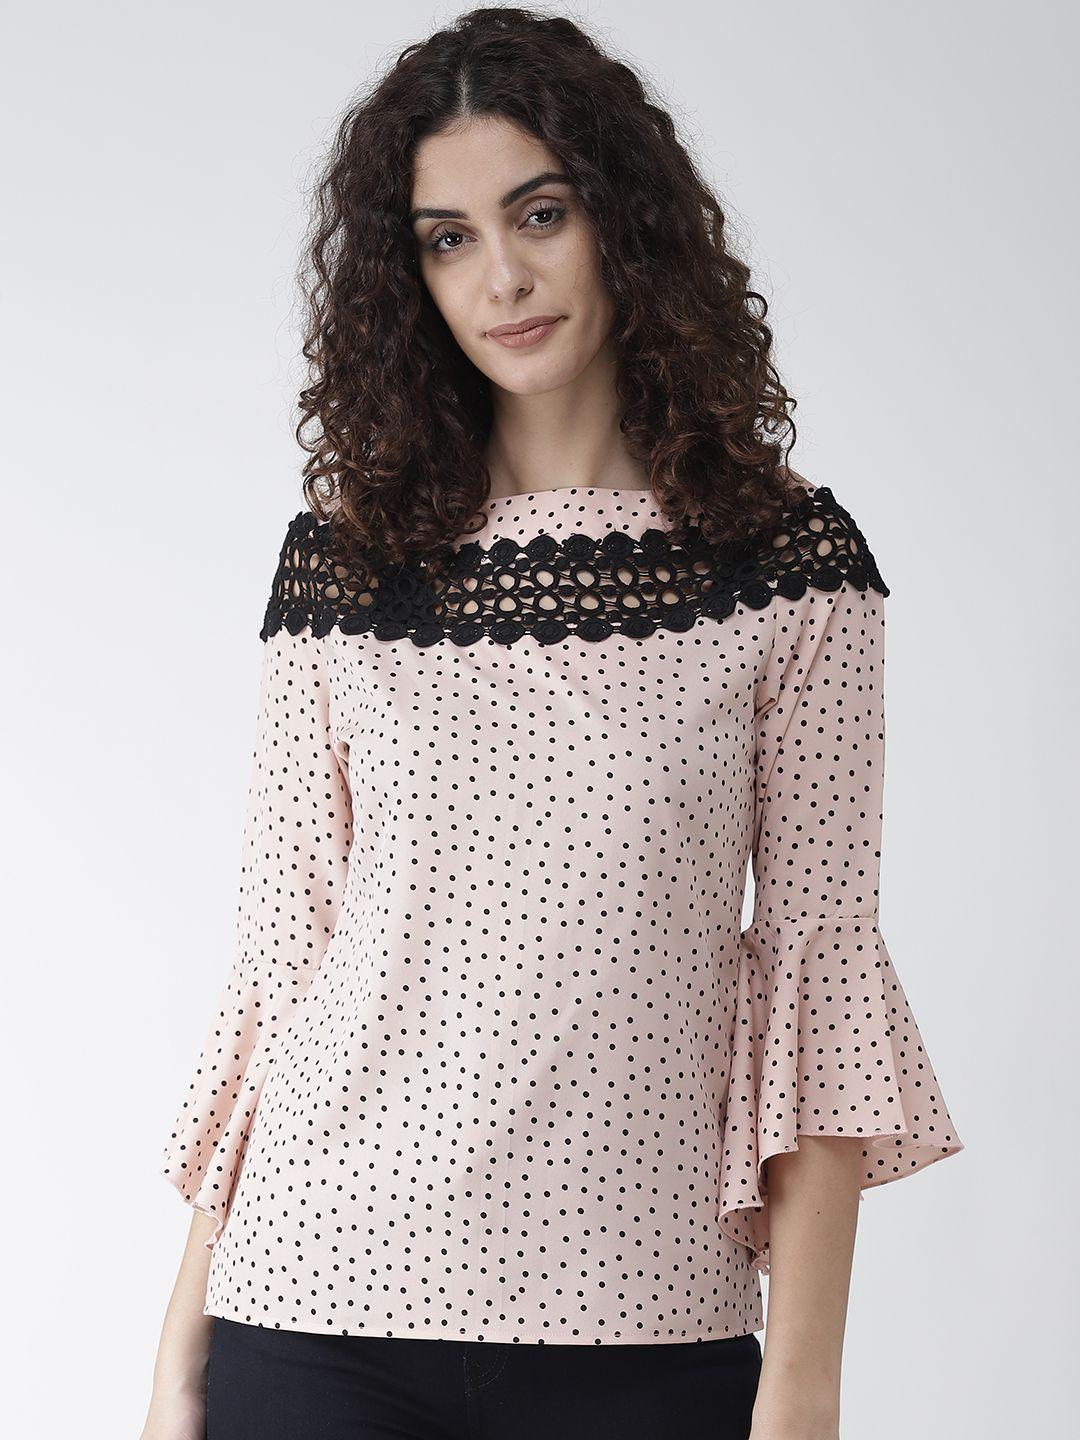 style quotient women peach-coloured & black printed top